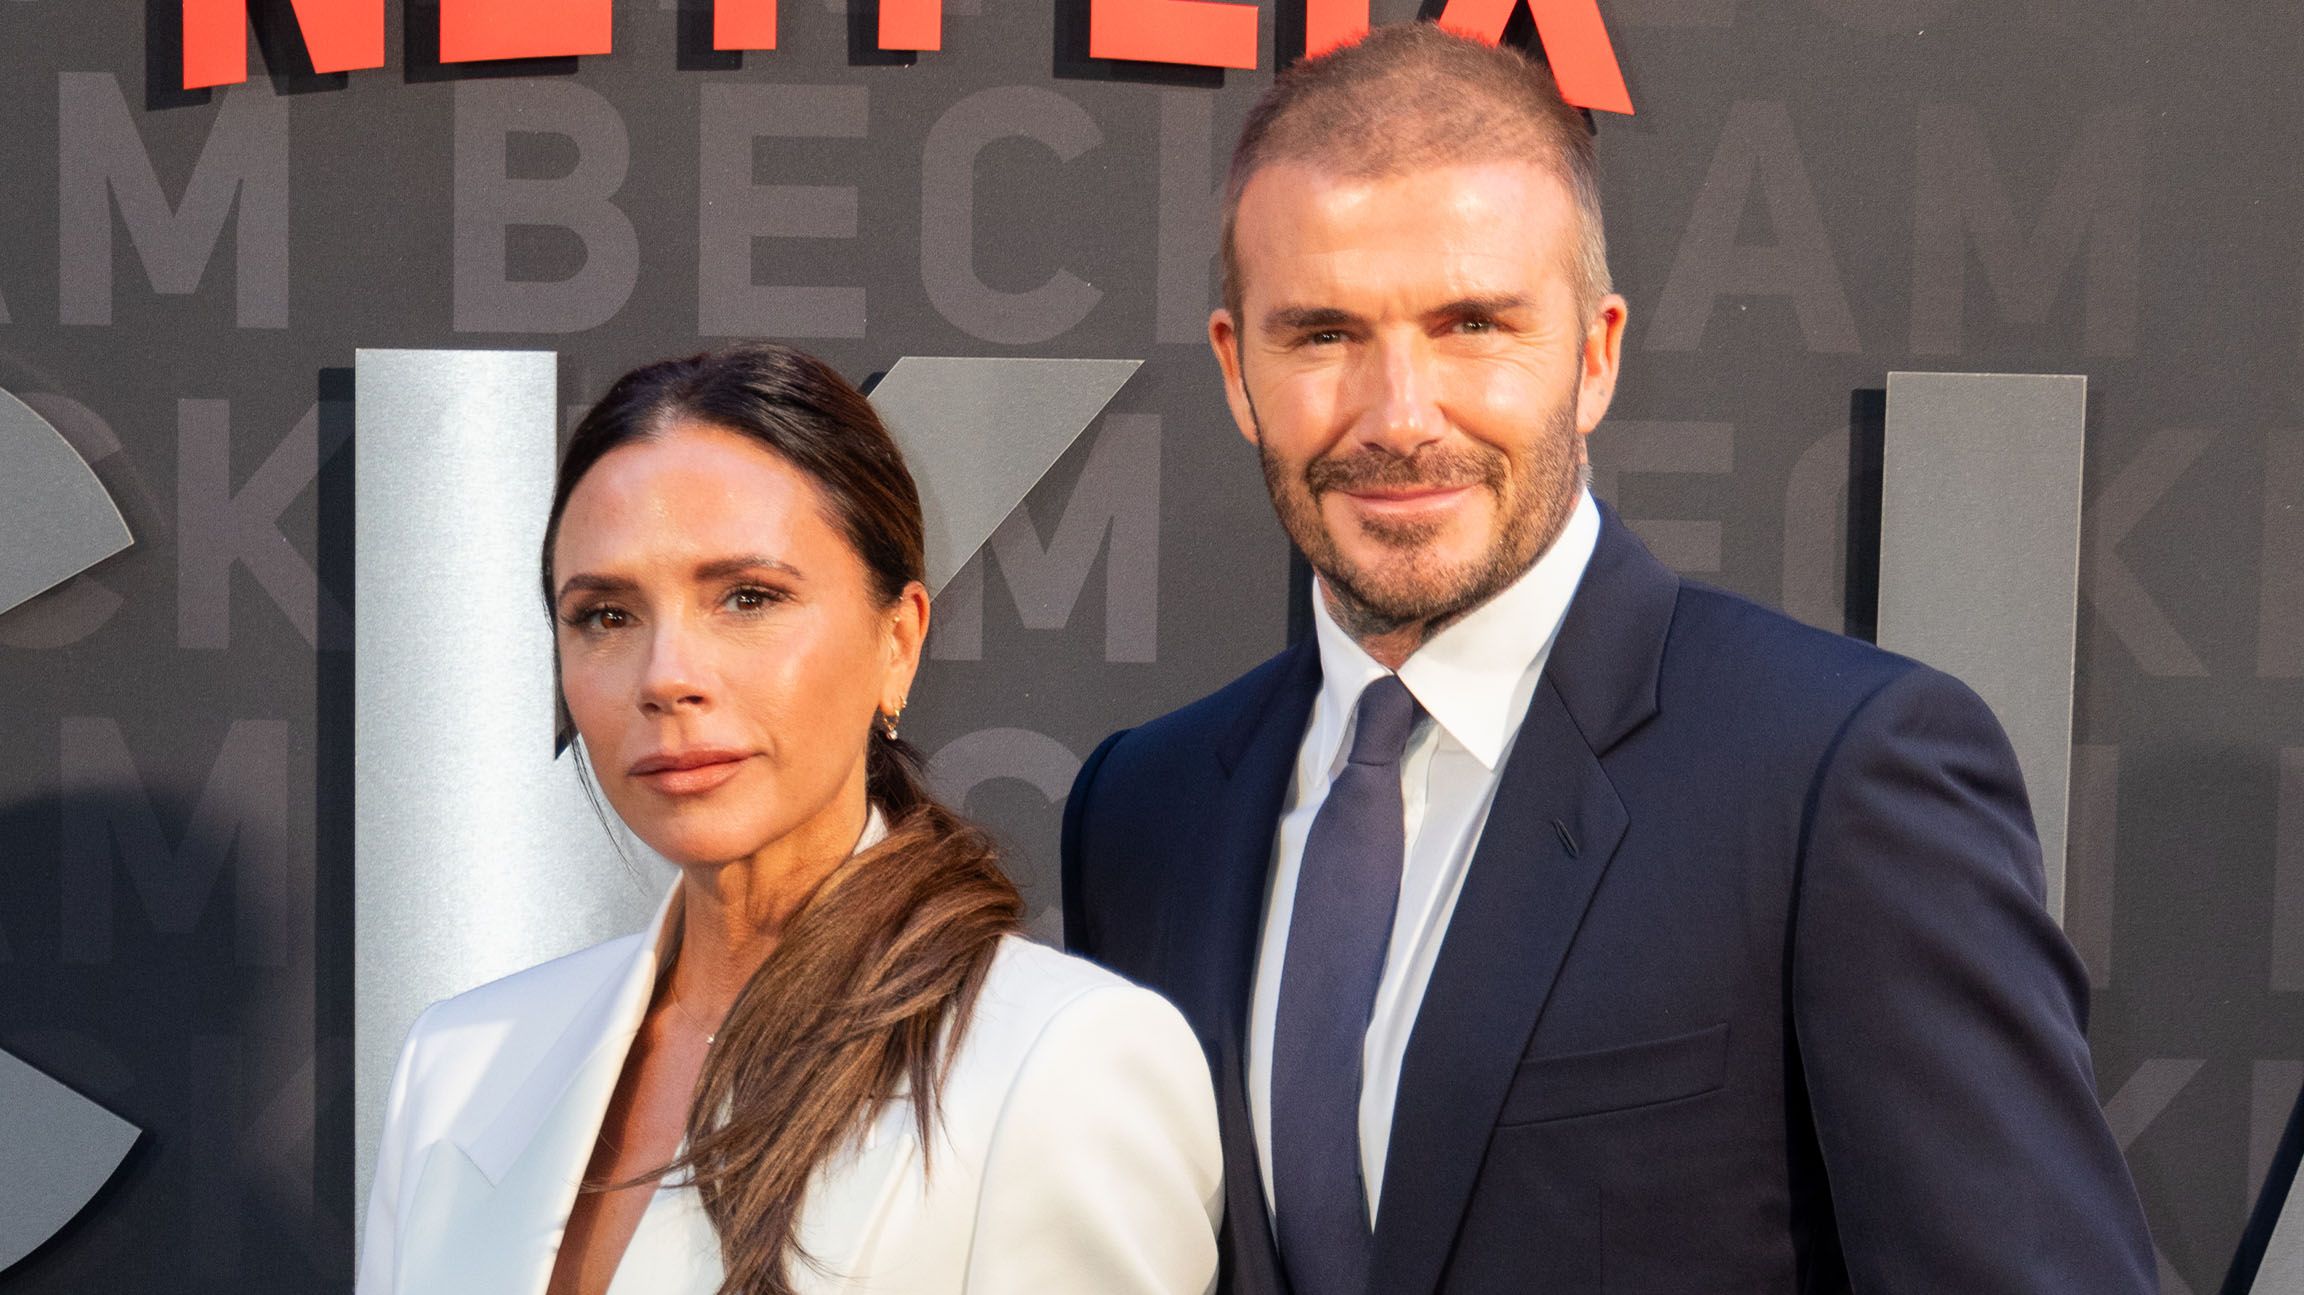 David and Victoria Beckham finally address 'affair' claims after 20 years